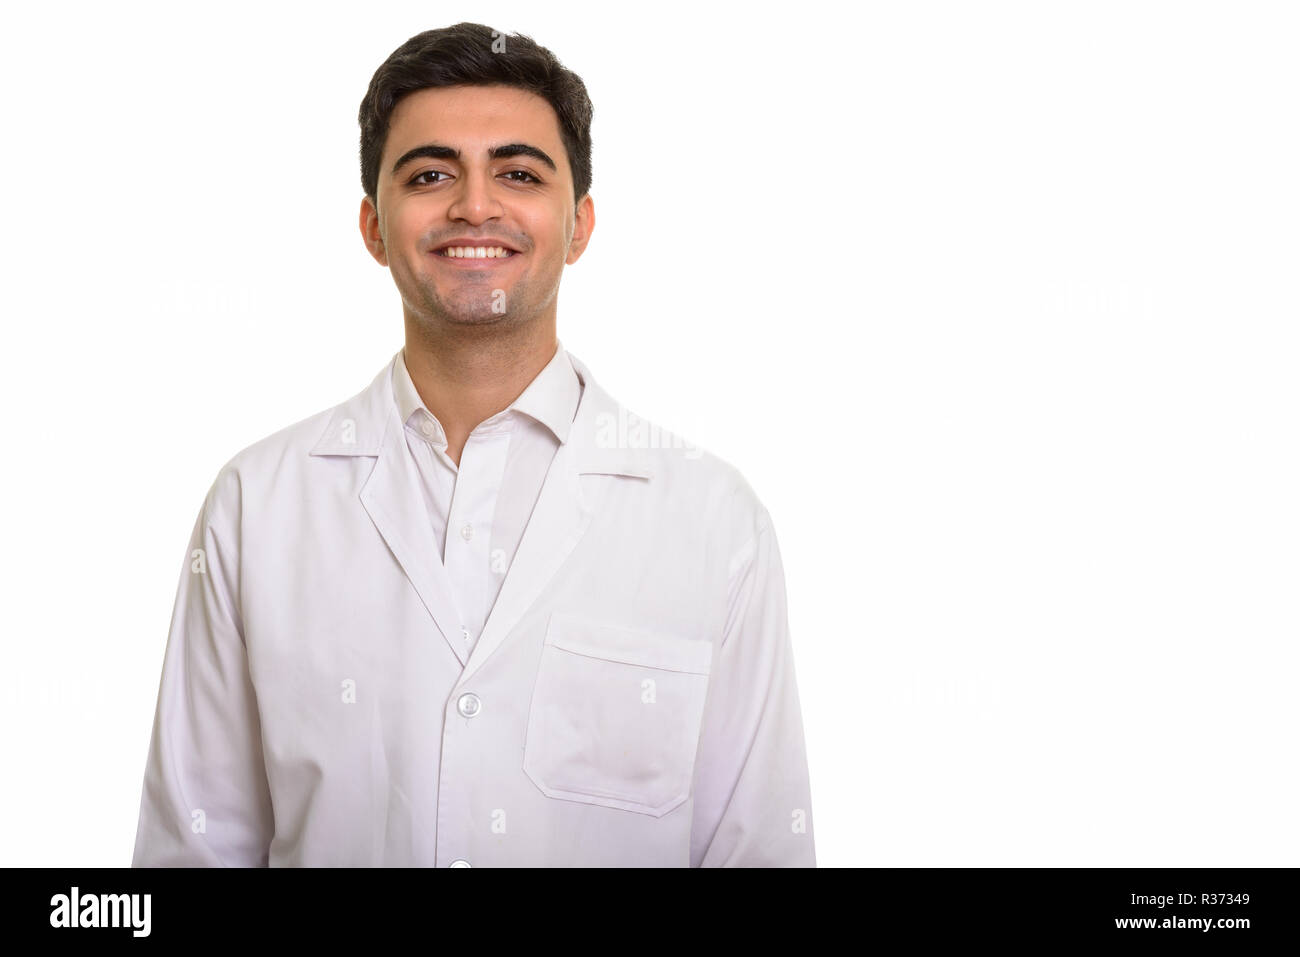 Young happy Persian man doctor smiling against white background Stock Photo